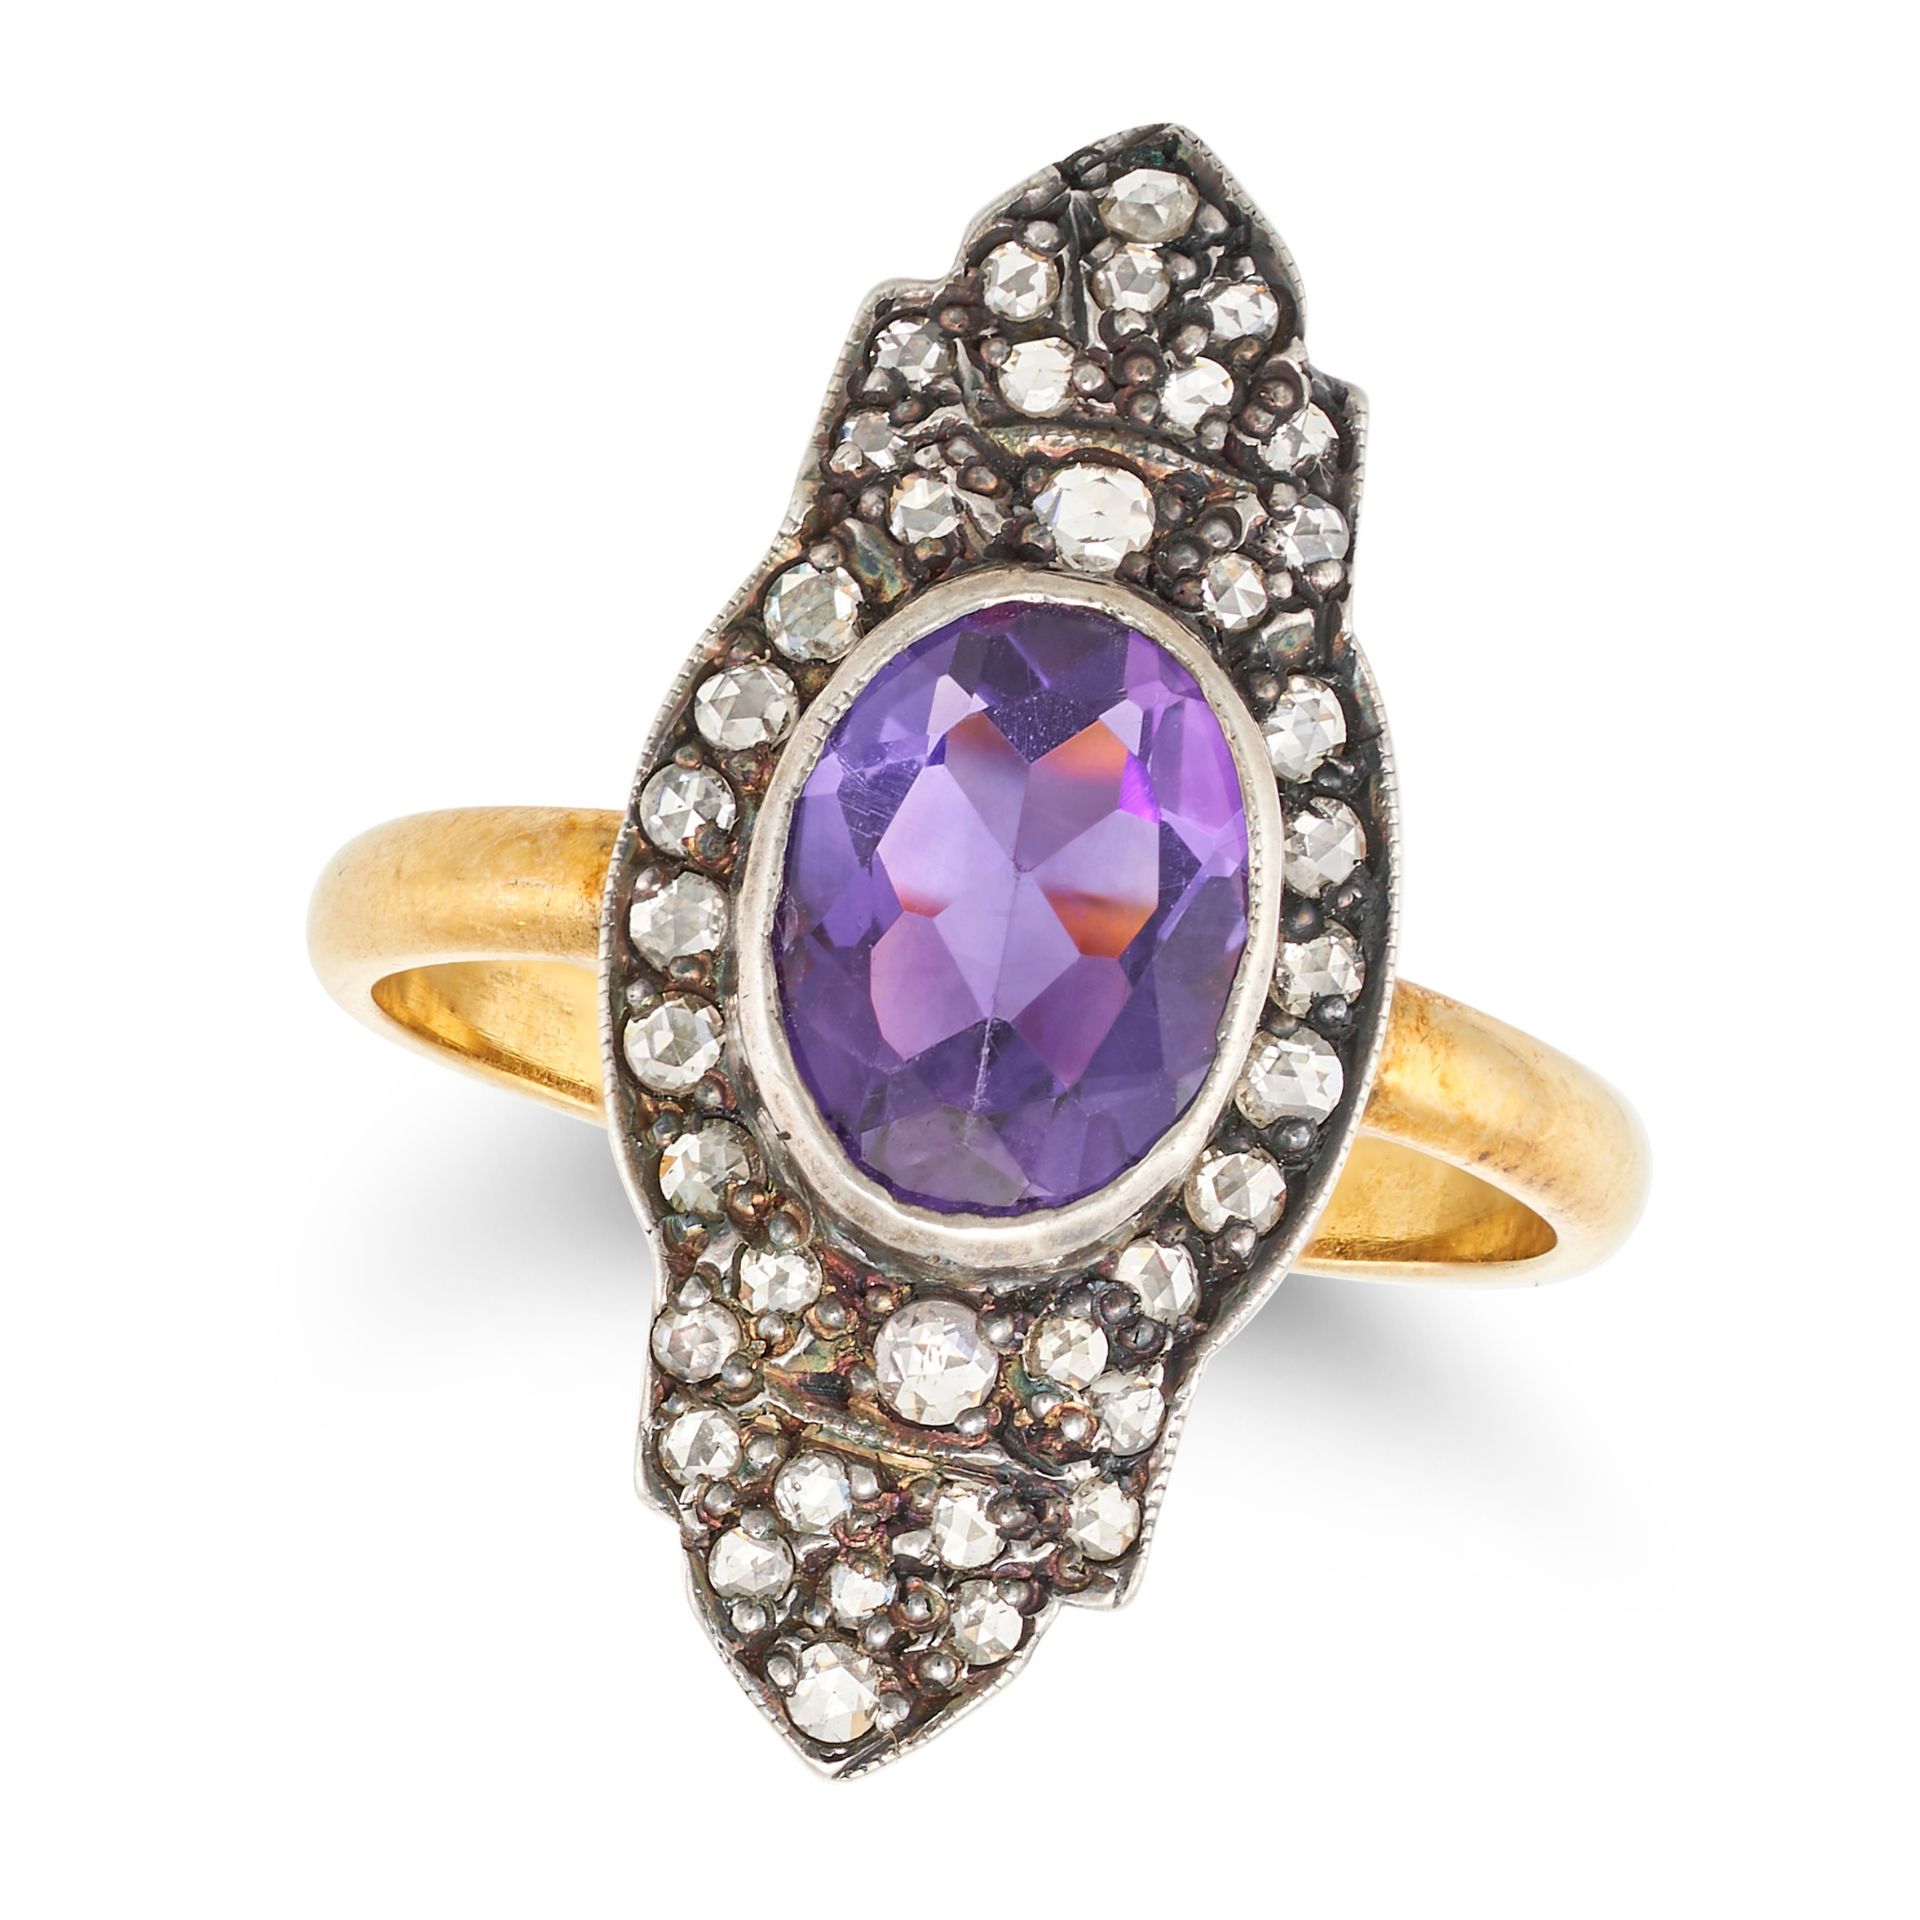 NO RESERVE - AN AMETHYST AND DIAMOND DRESS RING in yellow gold and silver, the elongated face set...